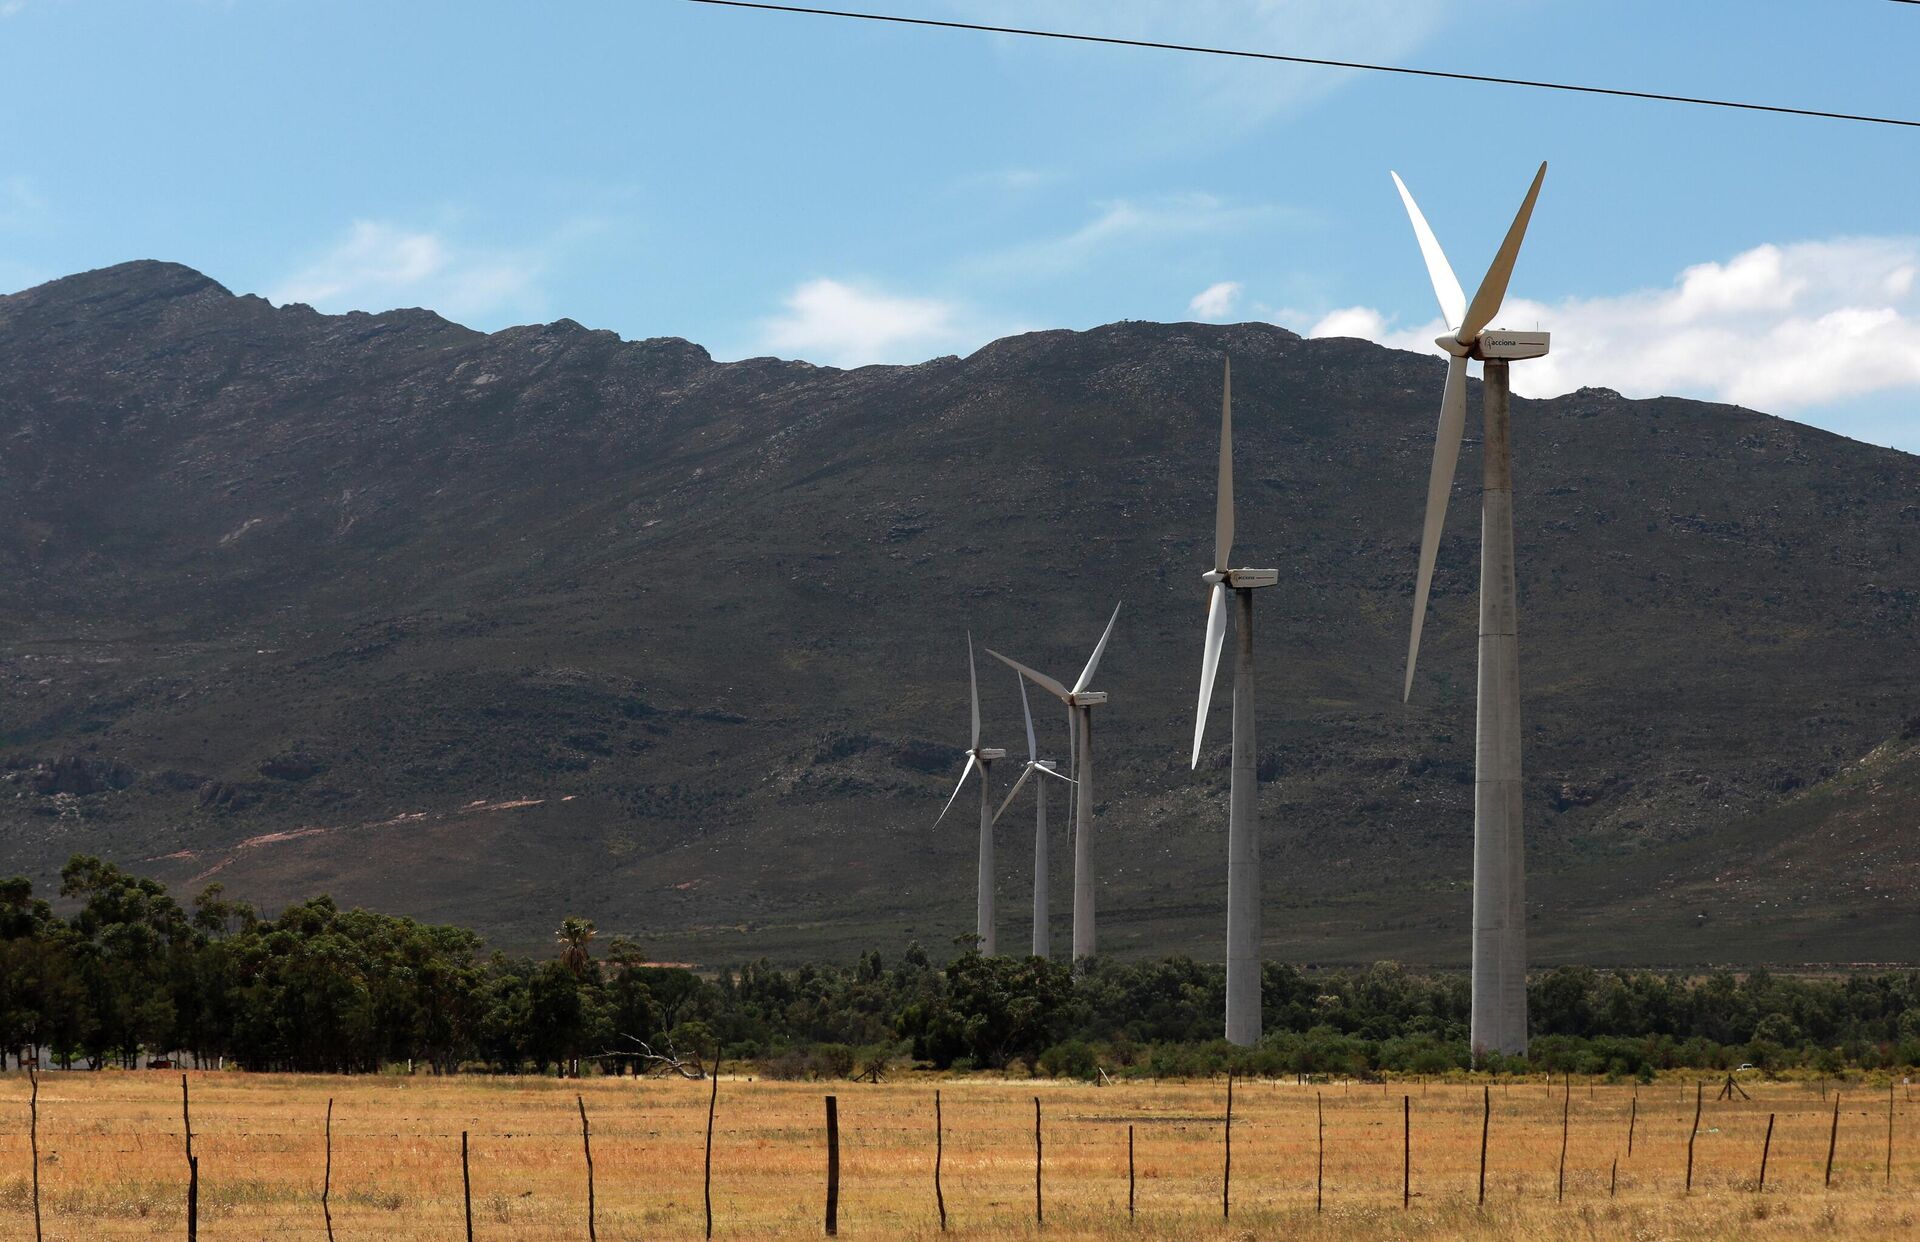 Wind turbines are seen at the Gouda Wind Farm located 115 km north east of Cape Town, South Africa, Monday, Nov. 7, 2022. The wind farm is one of the biggest in Southern Africa. - Sputnik International, 1920, 21.01.2023